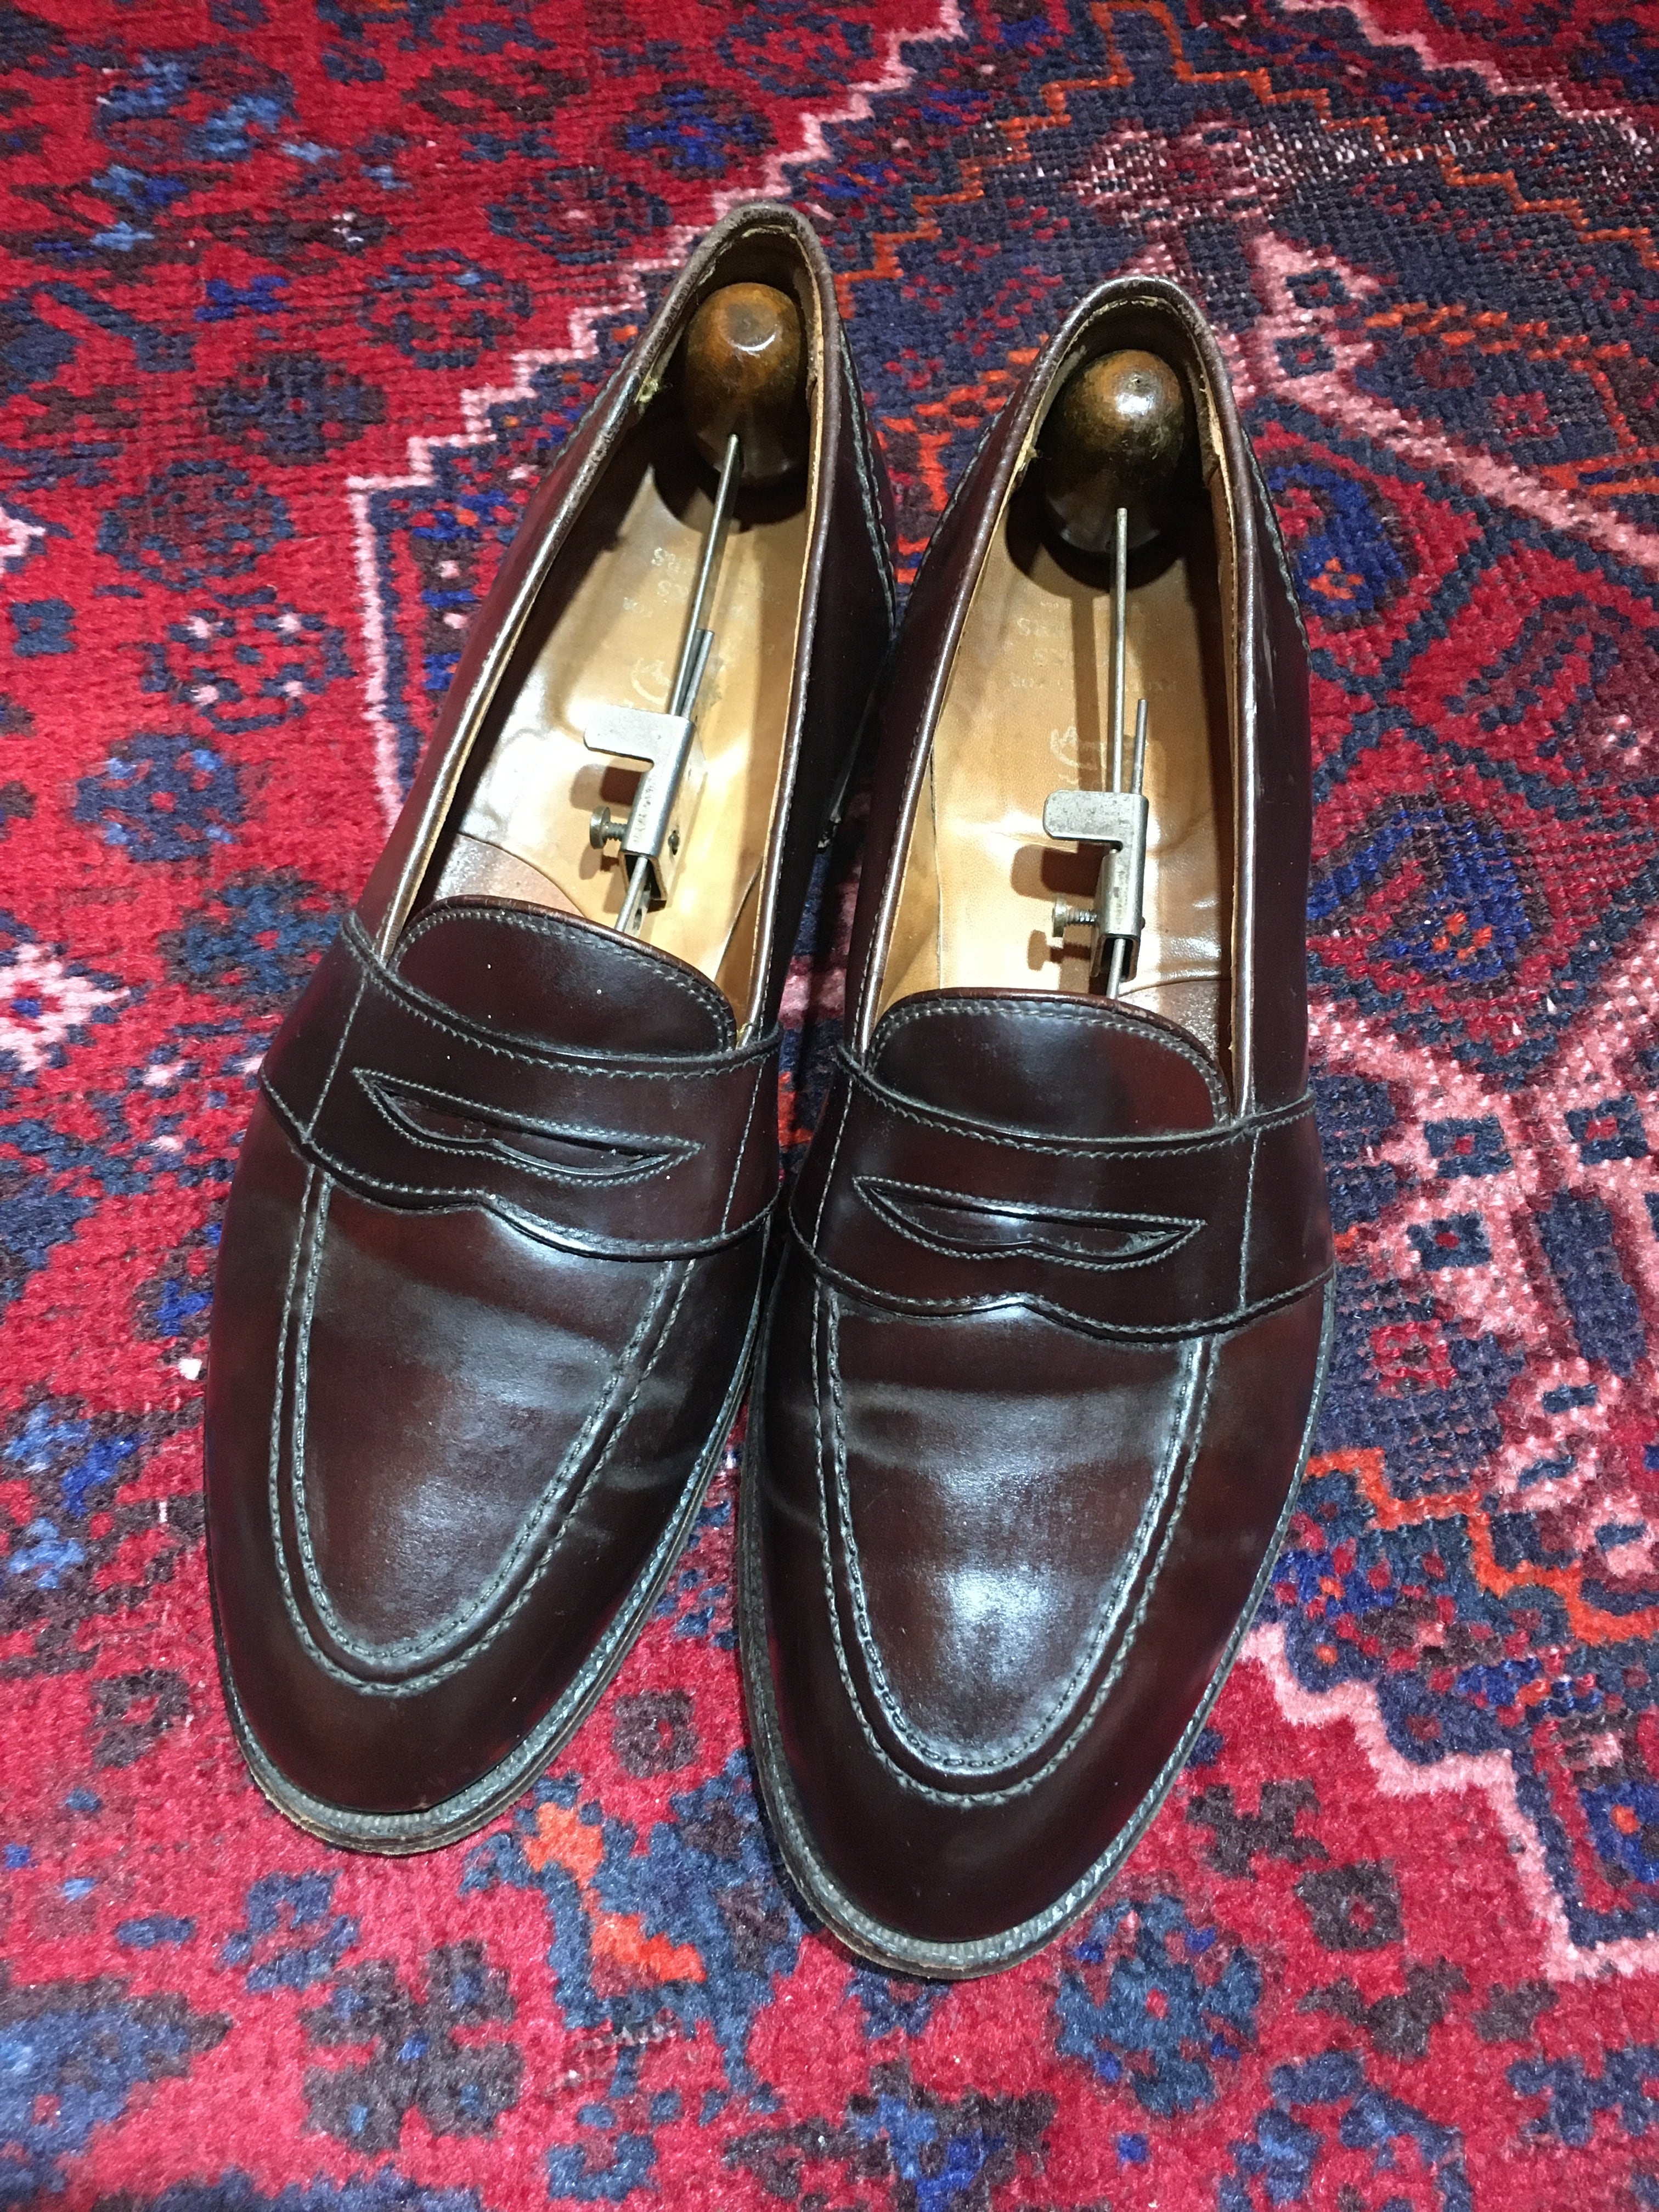 ◎.ALDEN×BROOKS BROTHERS CORDOVAN LEATHER COIN LOAFER MADE IN USA